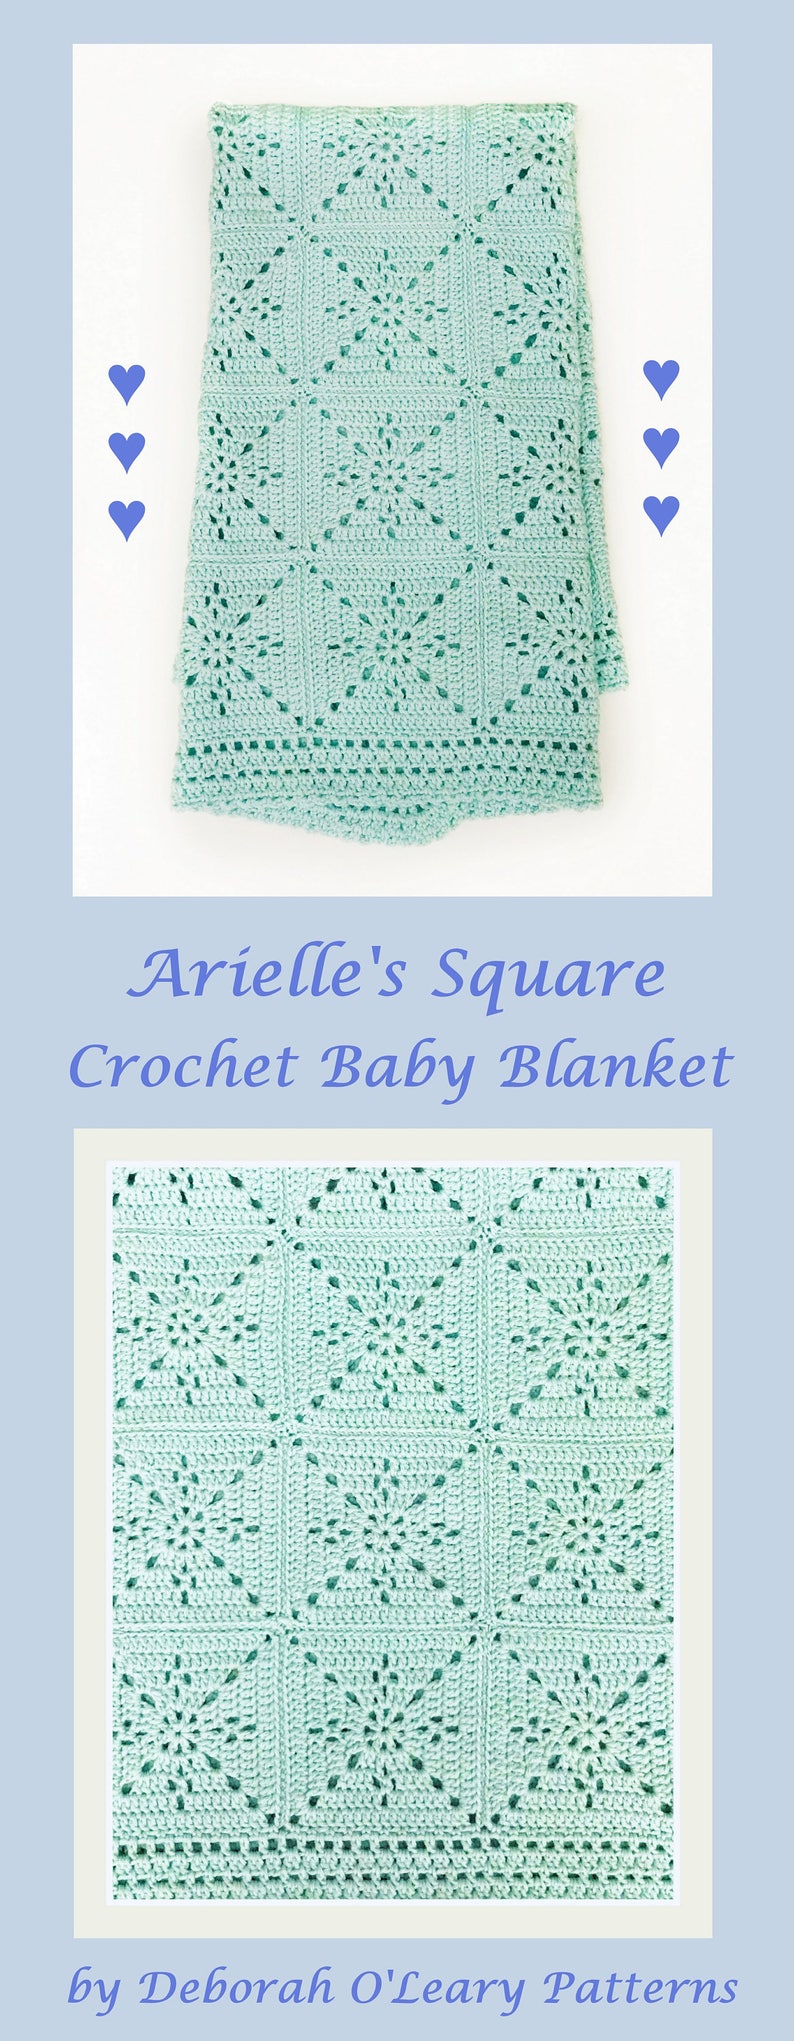 Crochet Baby Blanket Pattern Arielle's Square Easy Granny Square Pattern by Deborah O'Leary Patterns English Only image 2